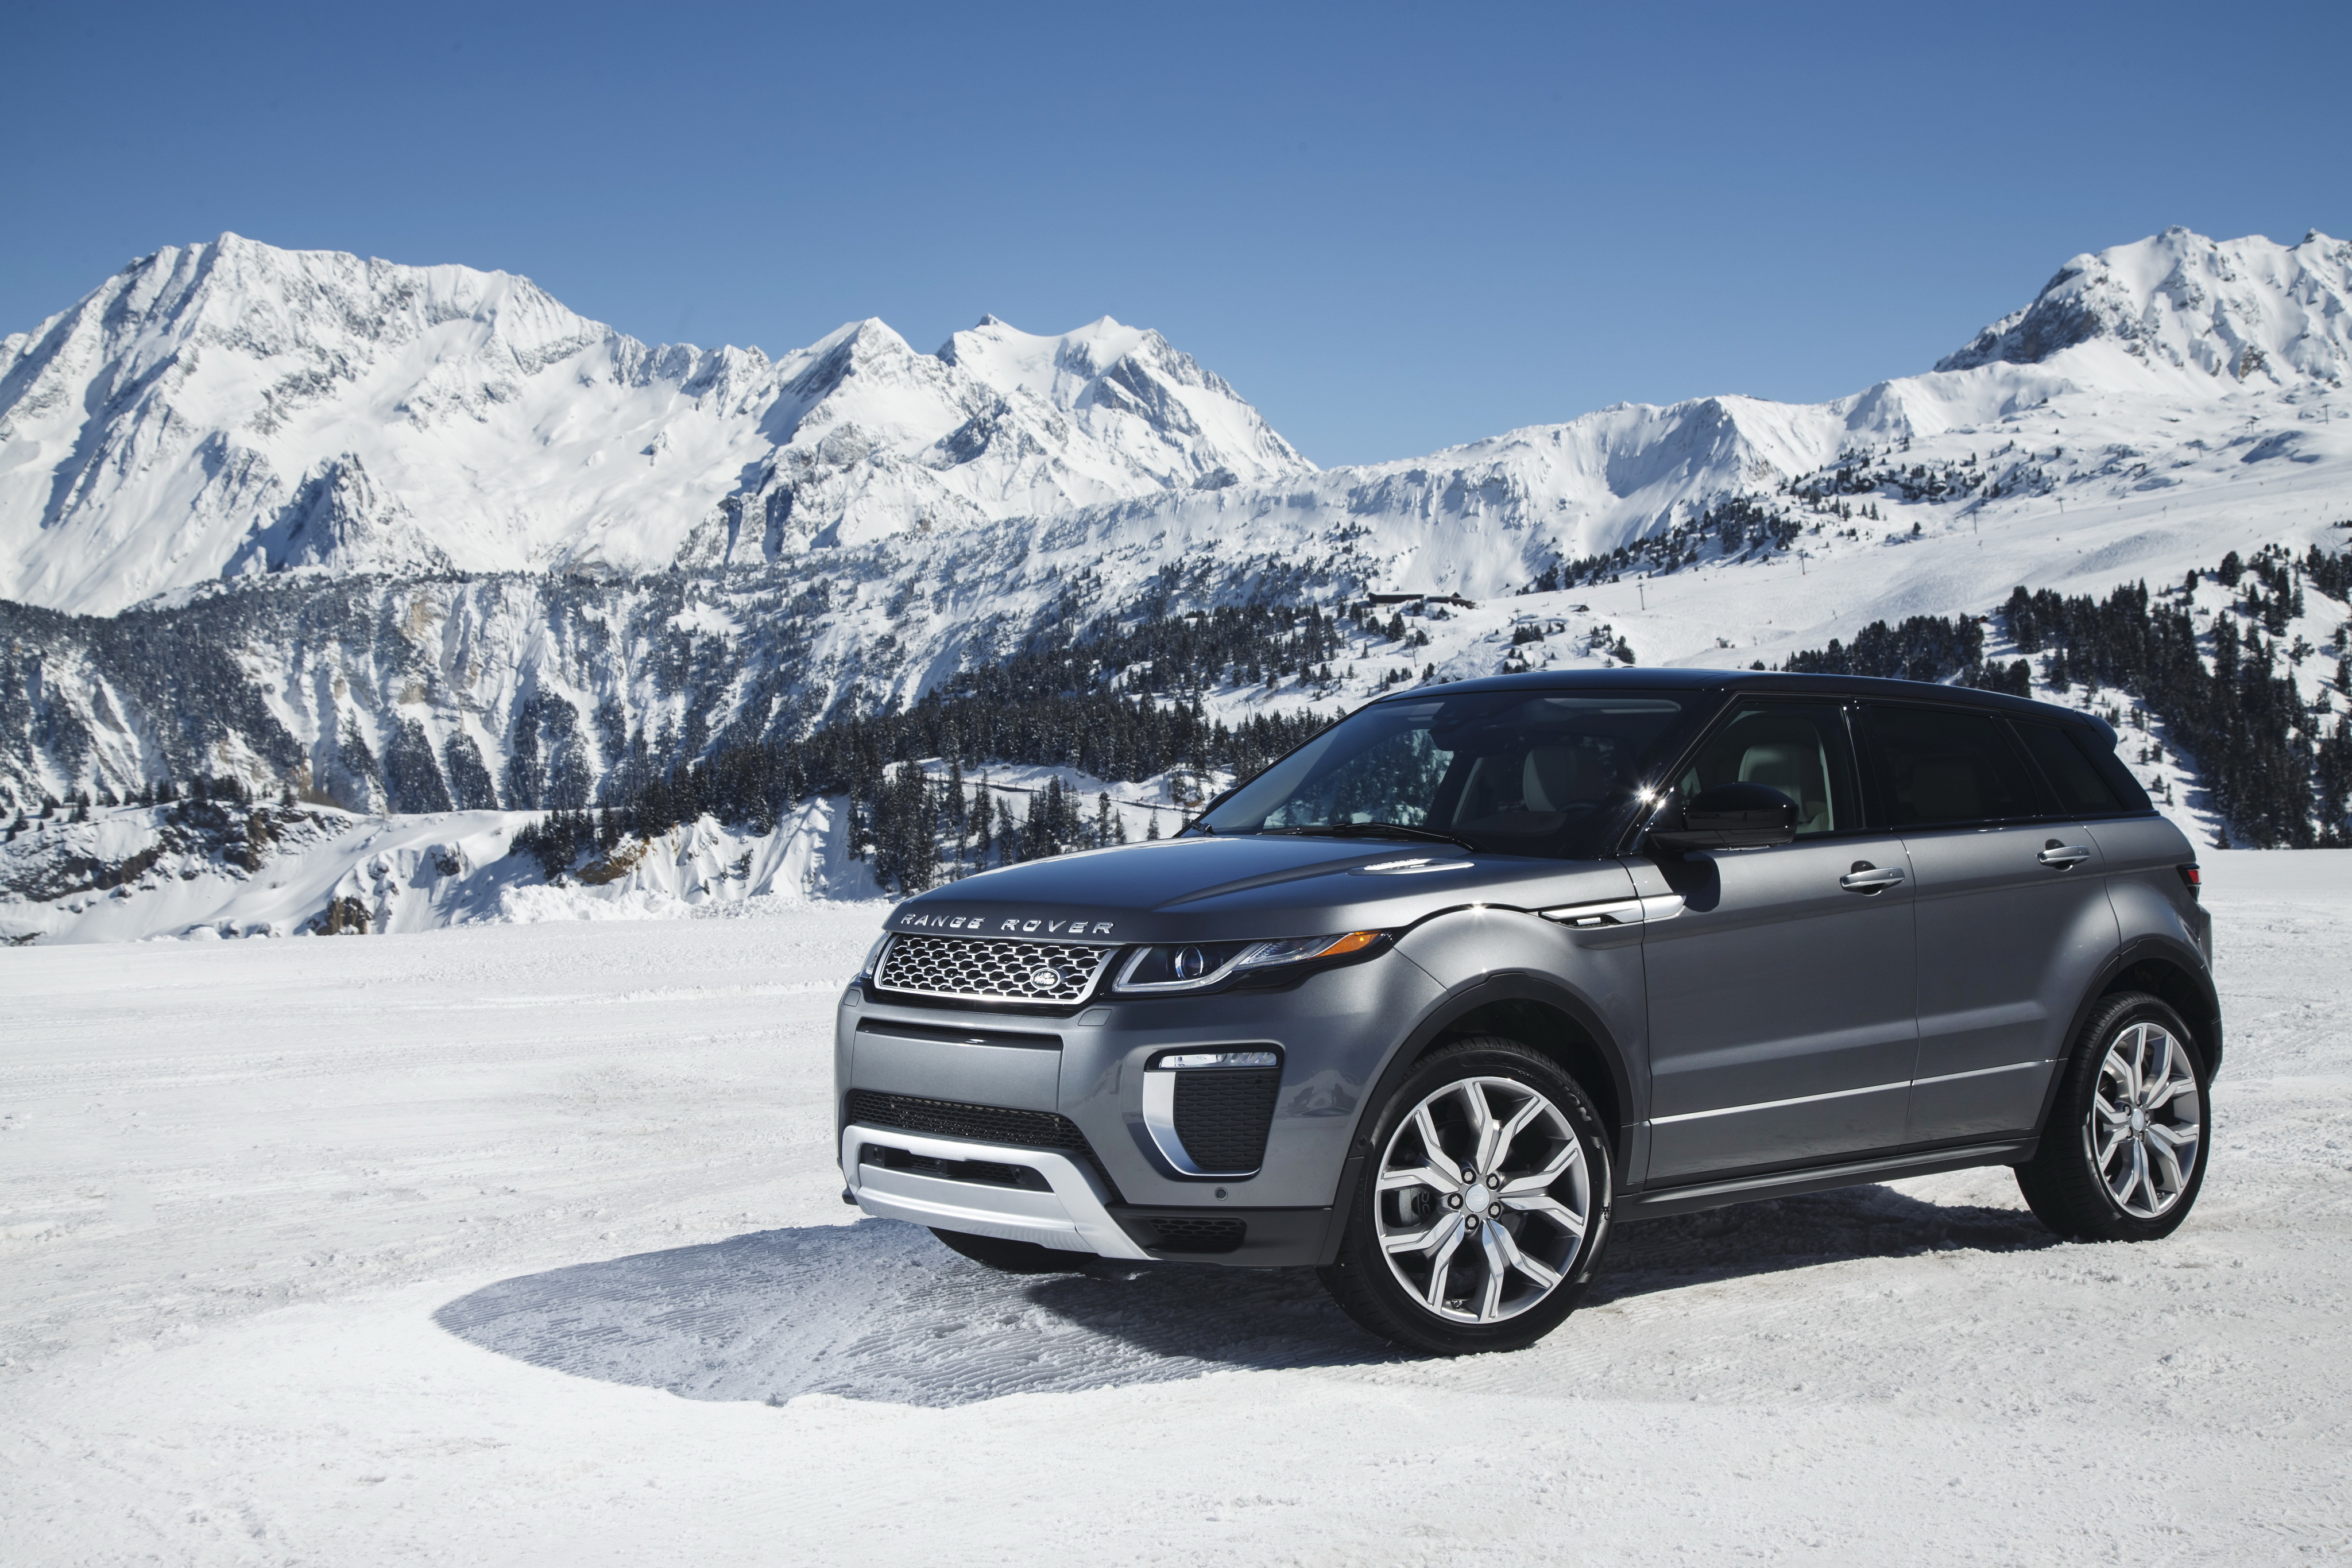 range rover, cars, land rover, snow, side view Full HD